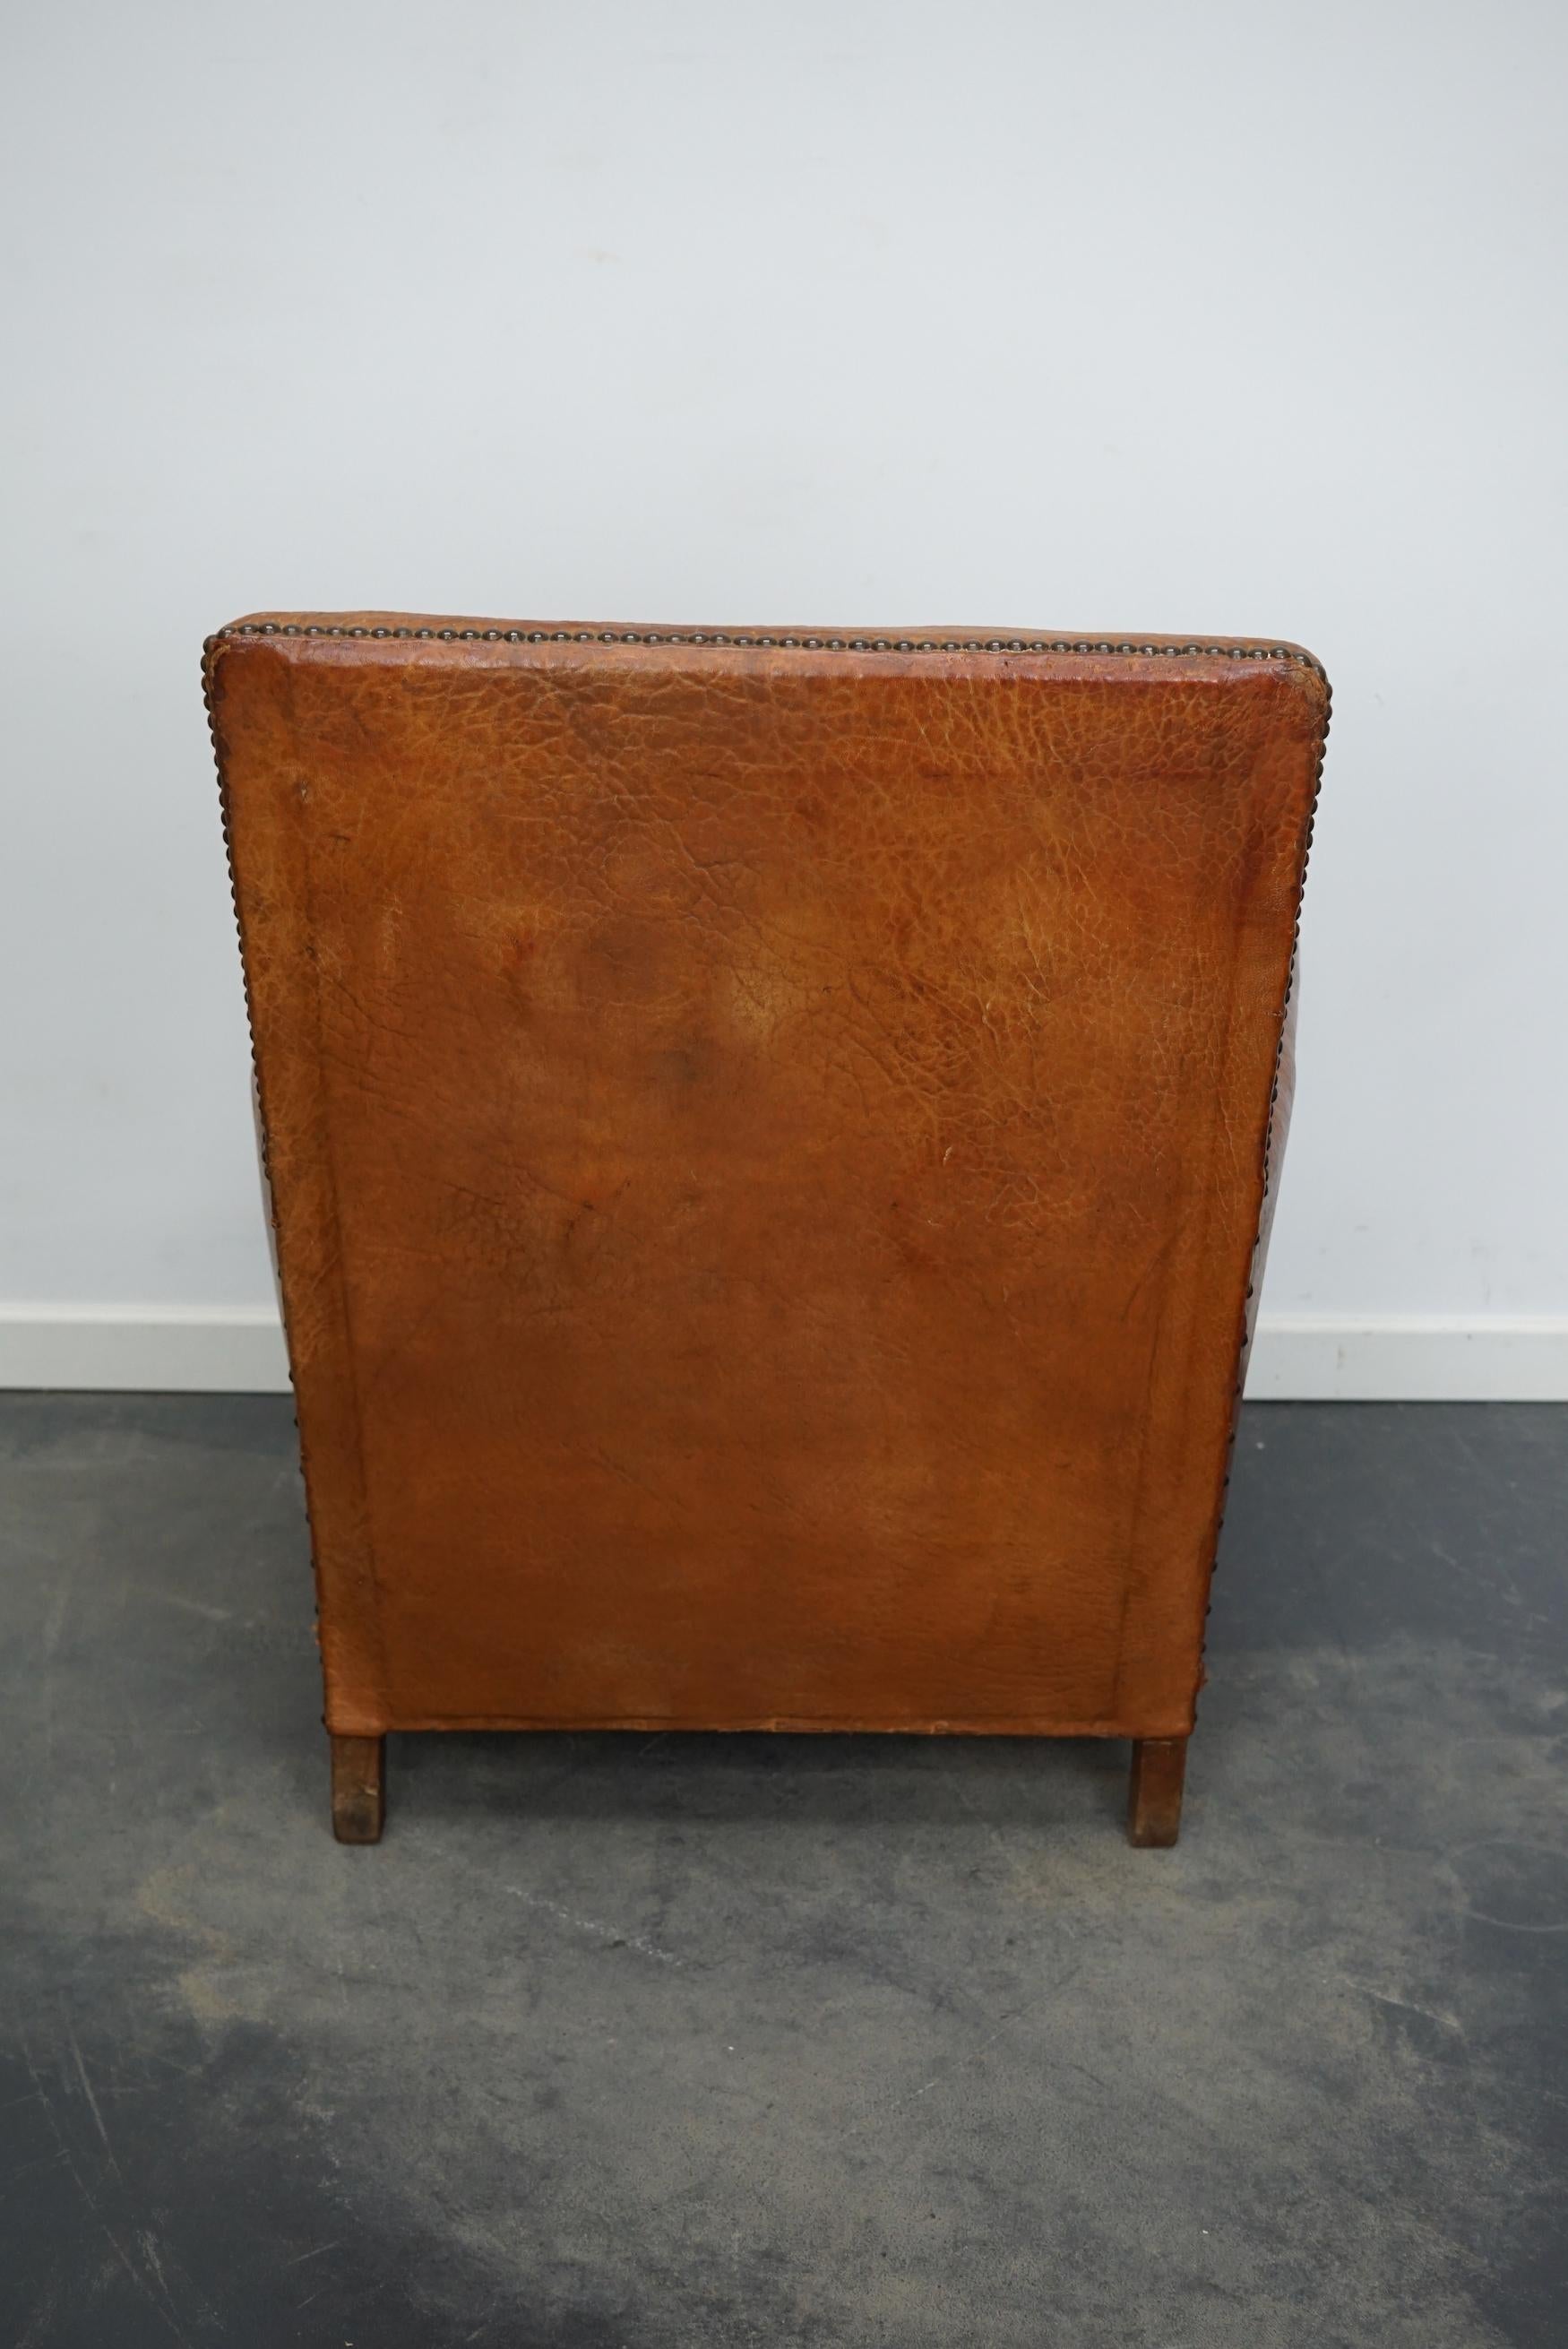 Vintage French Cognac-Colored Leather Club Chair, 1940s For Sale 6